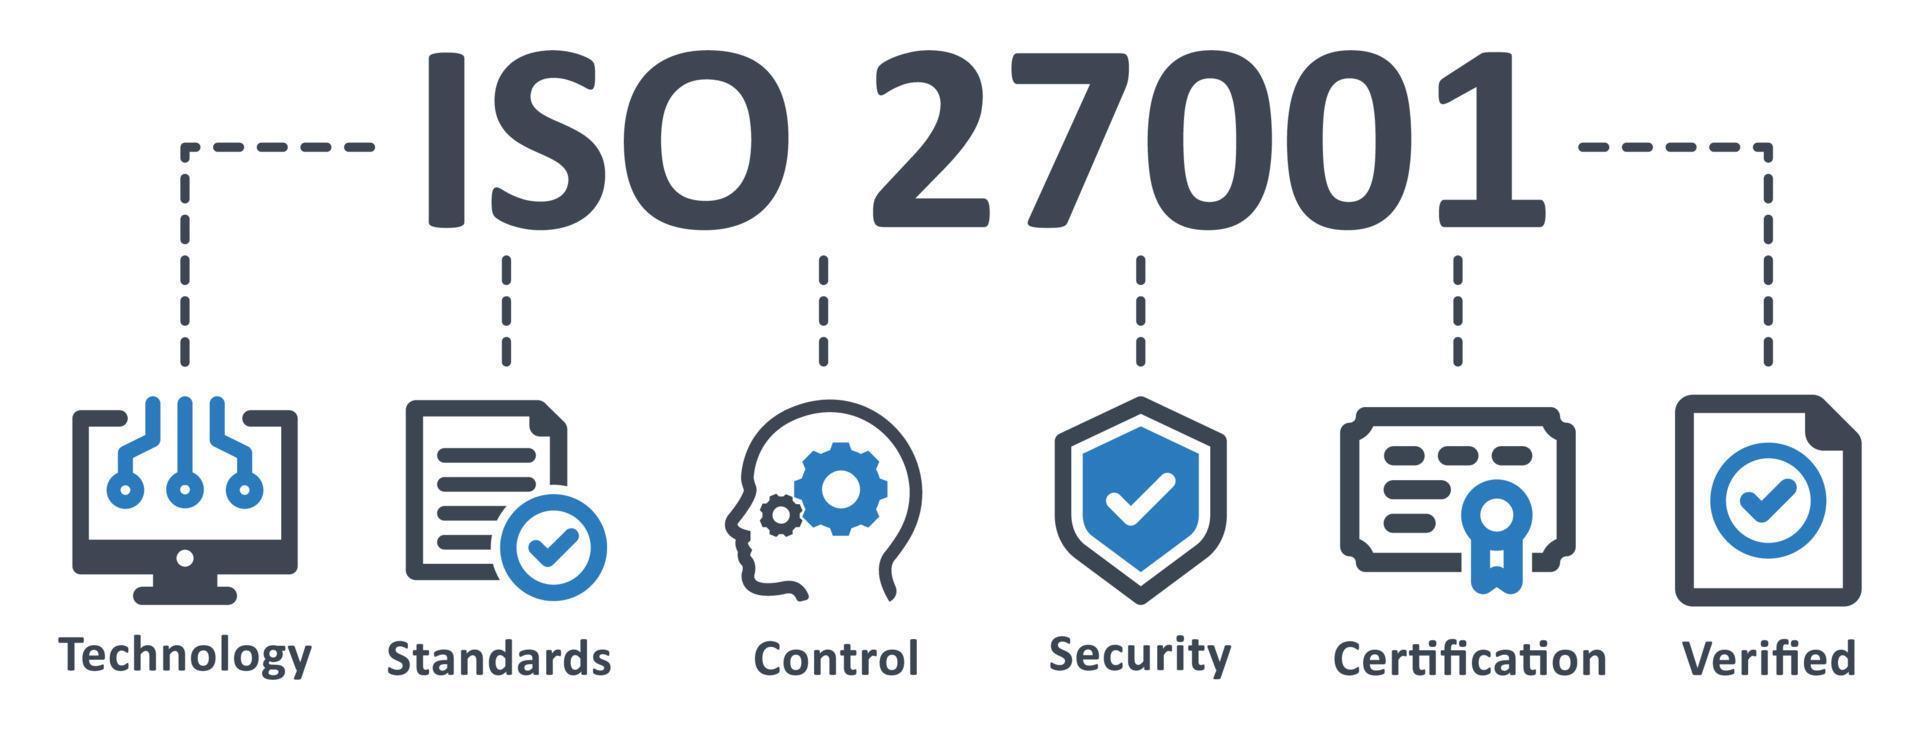 ISO 27001 icon - vector illustration . iso, information, security, management, system, standard, quality, certification, infographic, template, presentation, concept, banner, icon set, icons .